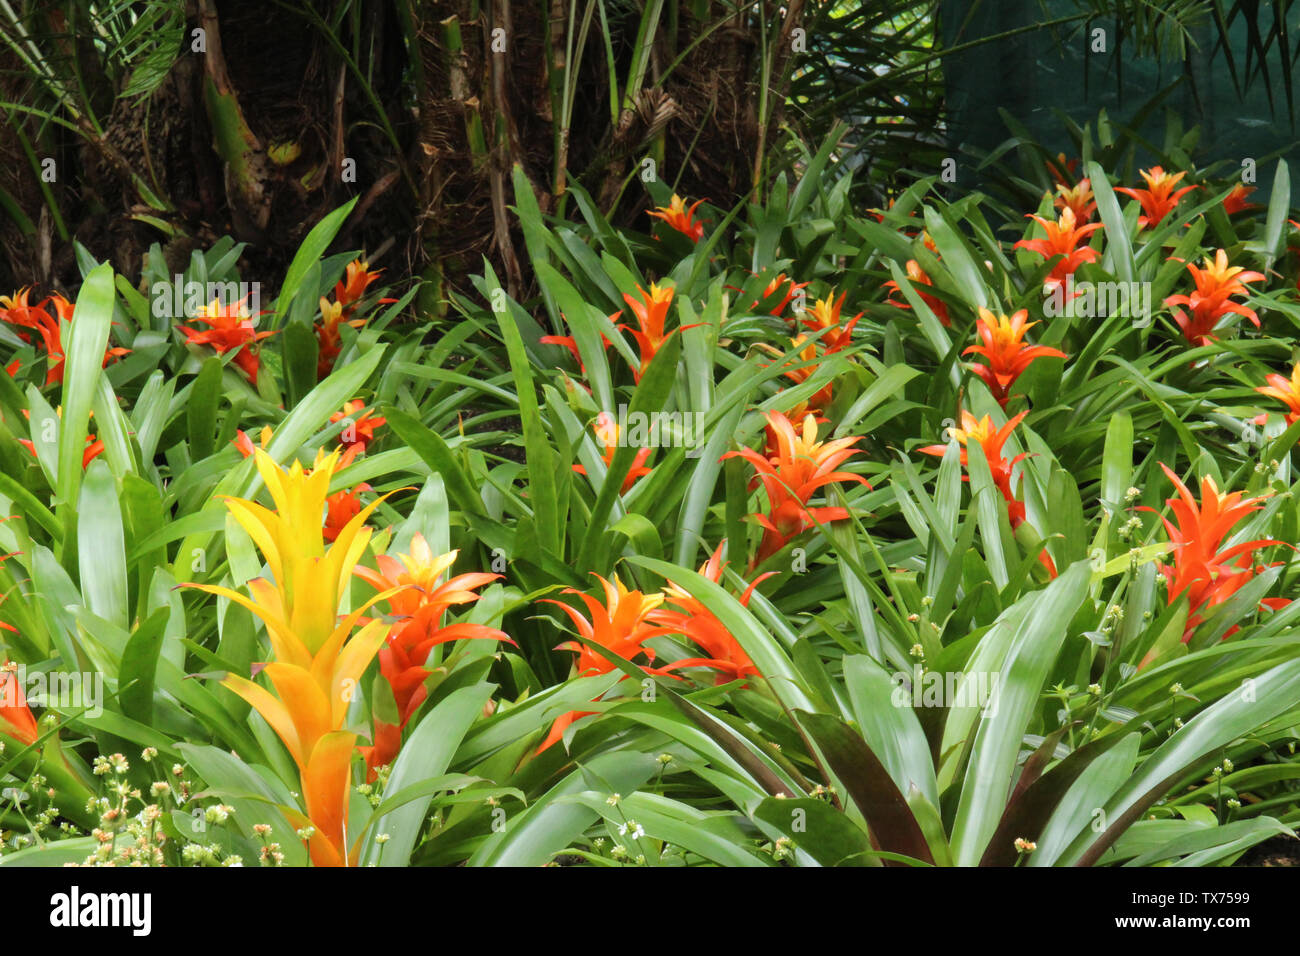 A large grouping of orange and yellow Guzmania Bromeliads growing in a tropical garden in front of a palm tree Stock Photo